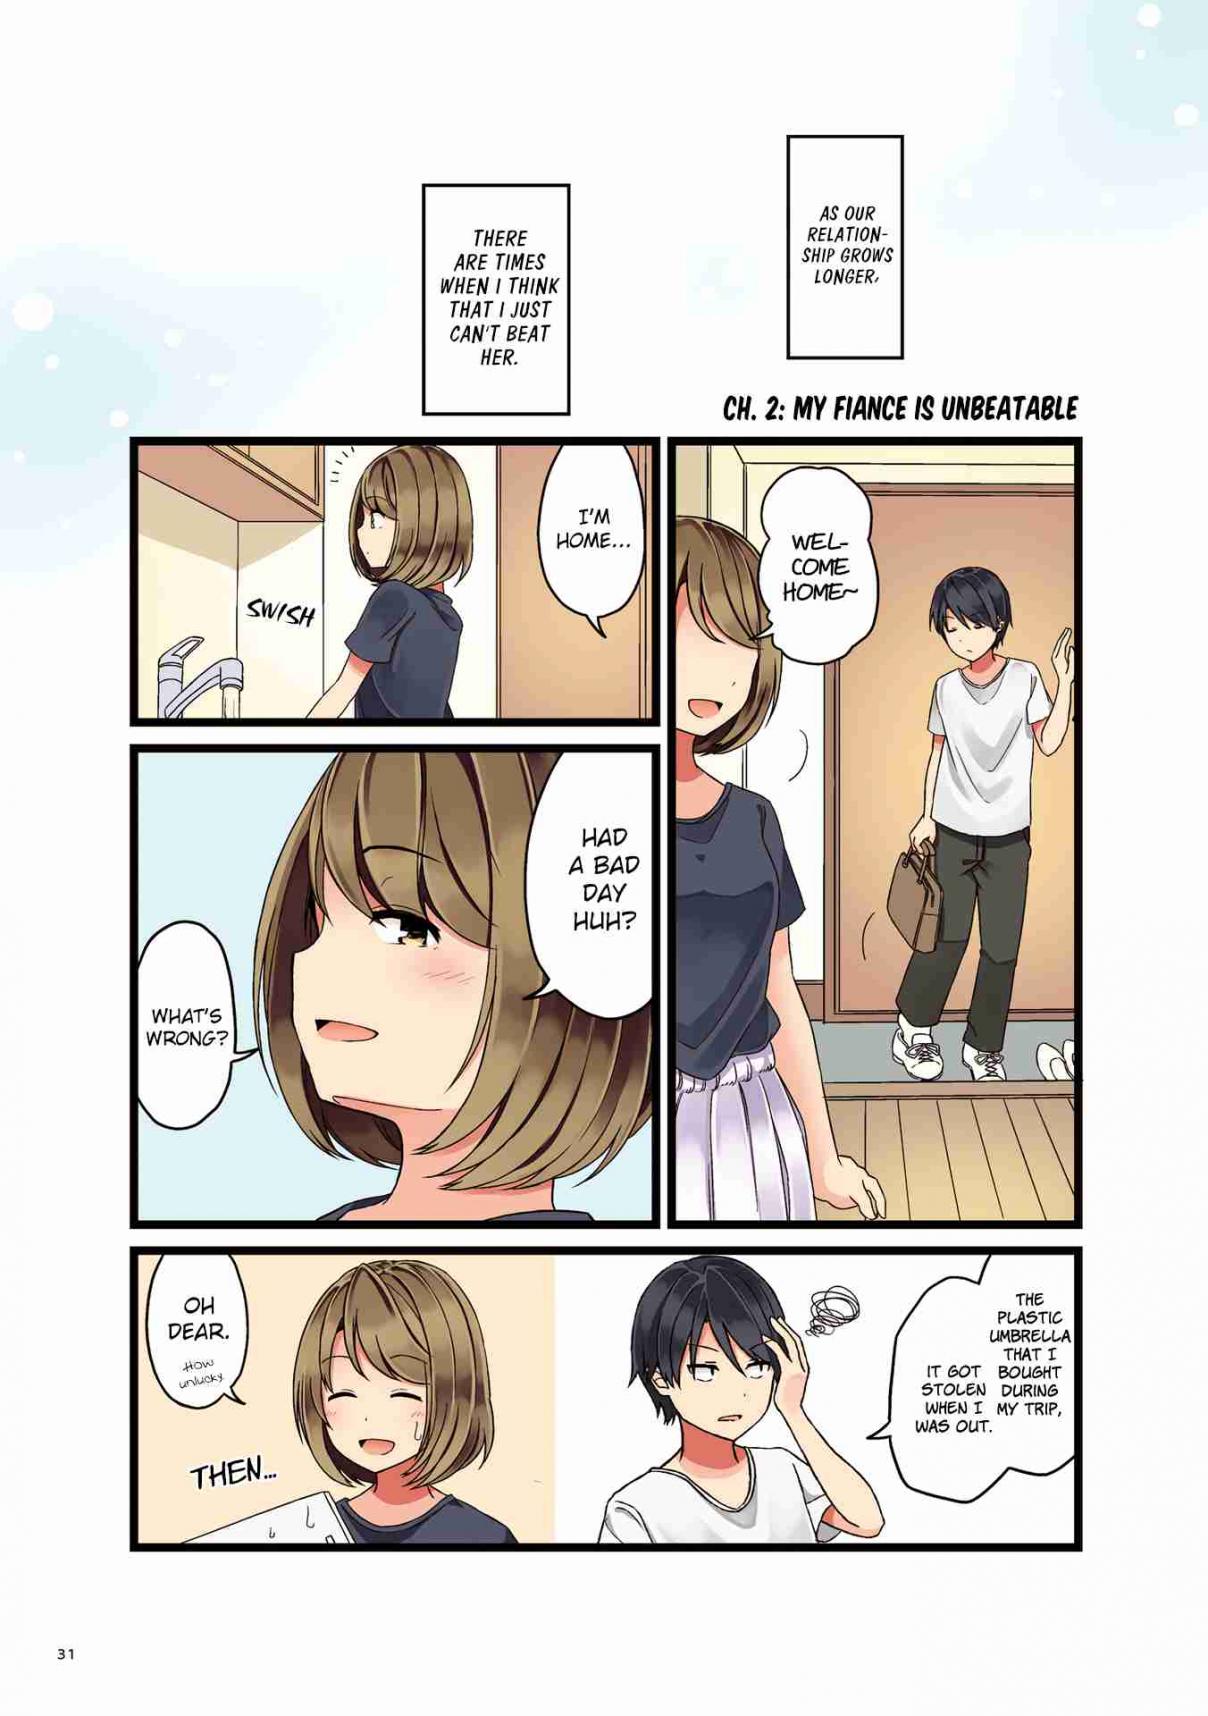 First Comes Love, Then Comes Marriage Vol. 1 Ch. 2 My Fiance is Unbeatable